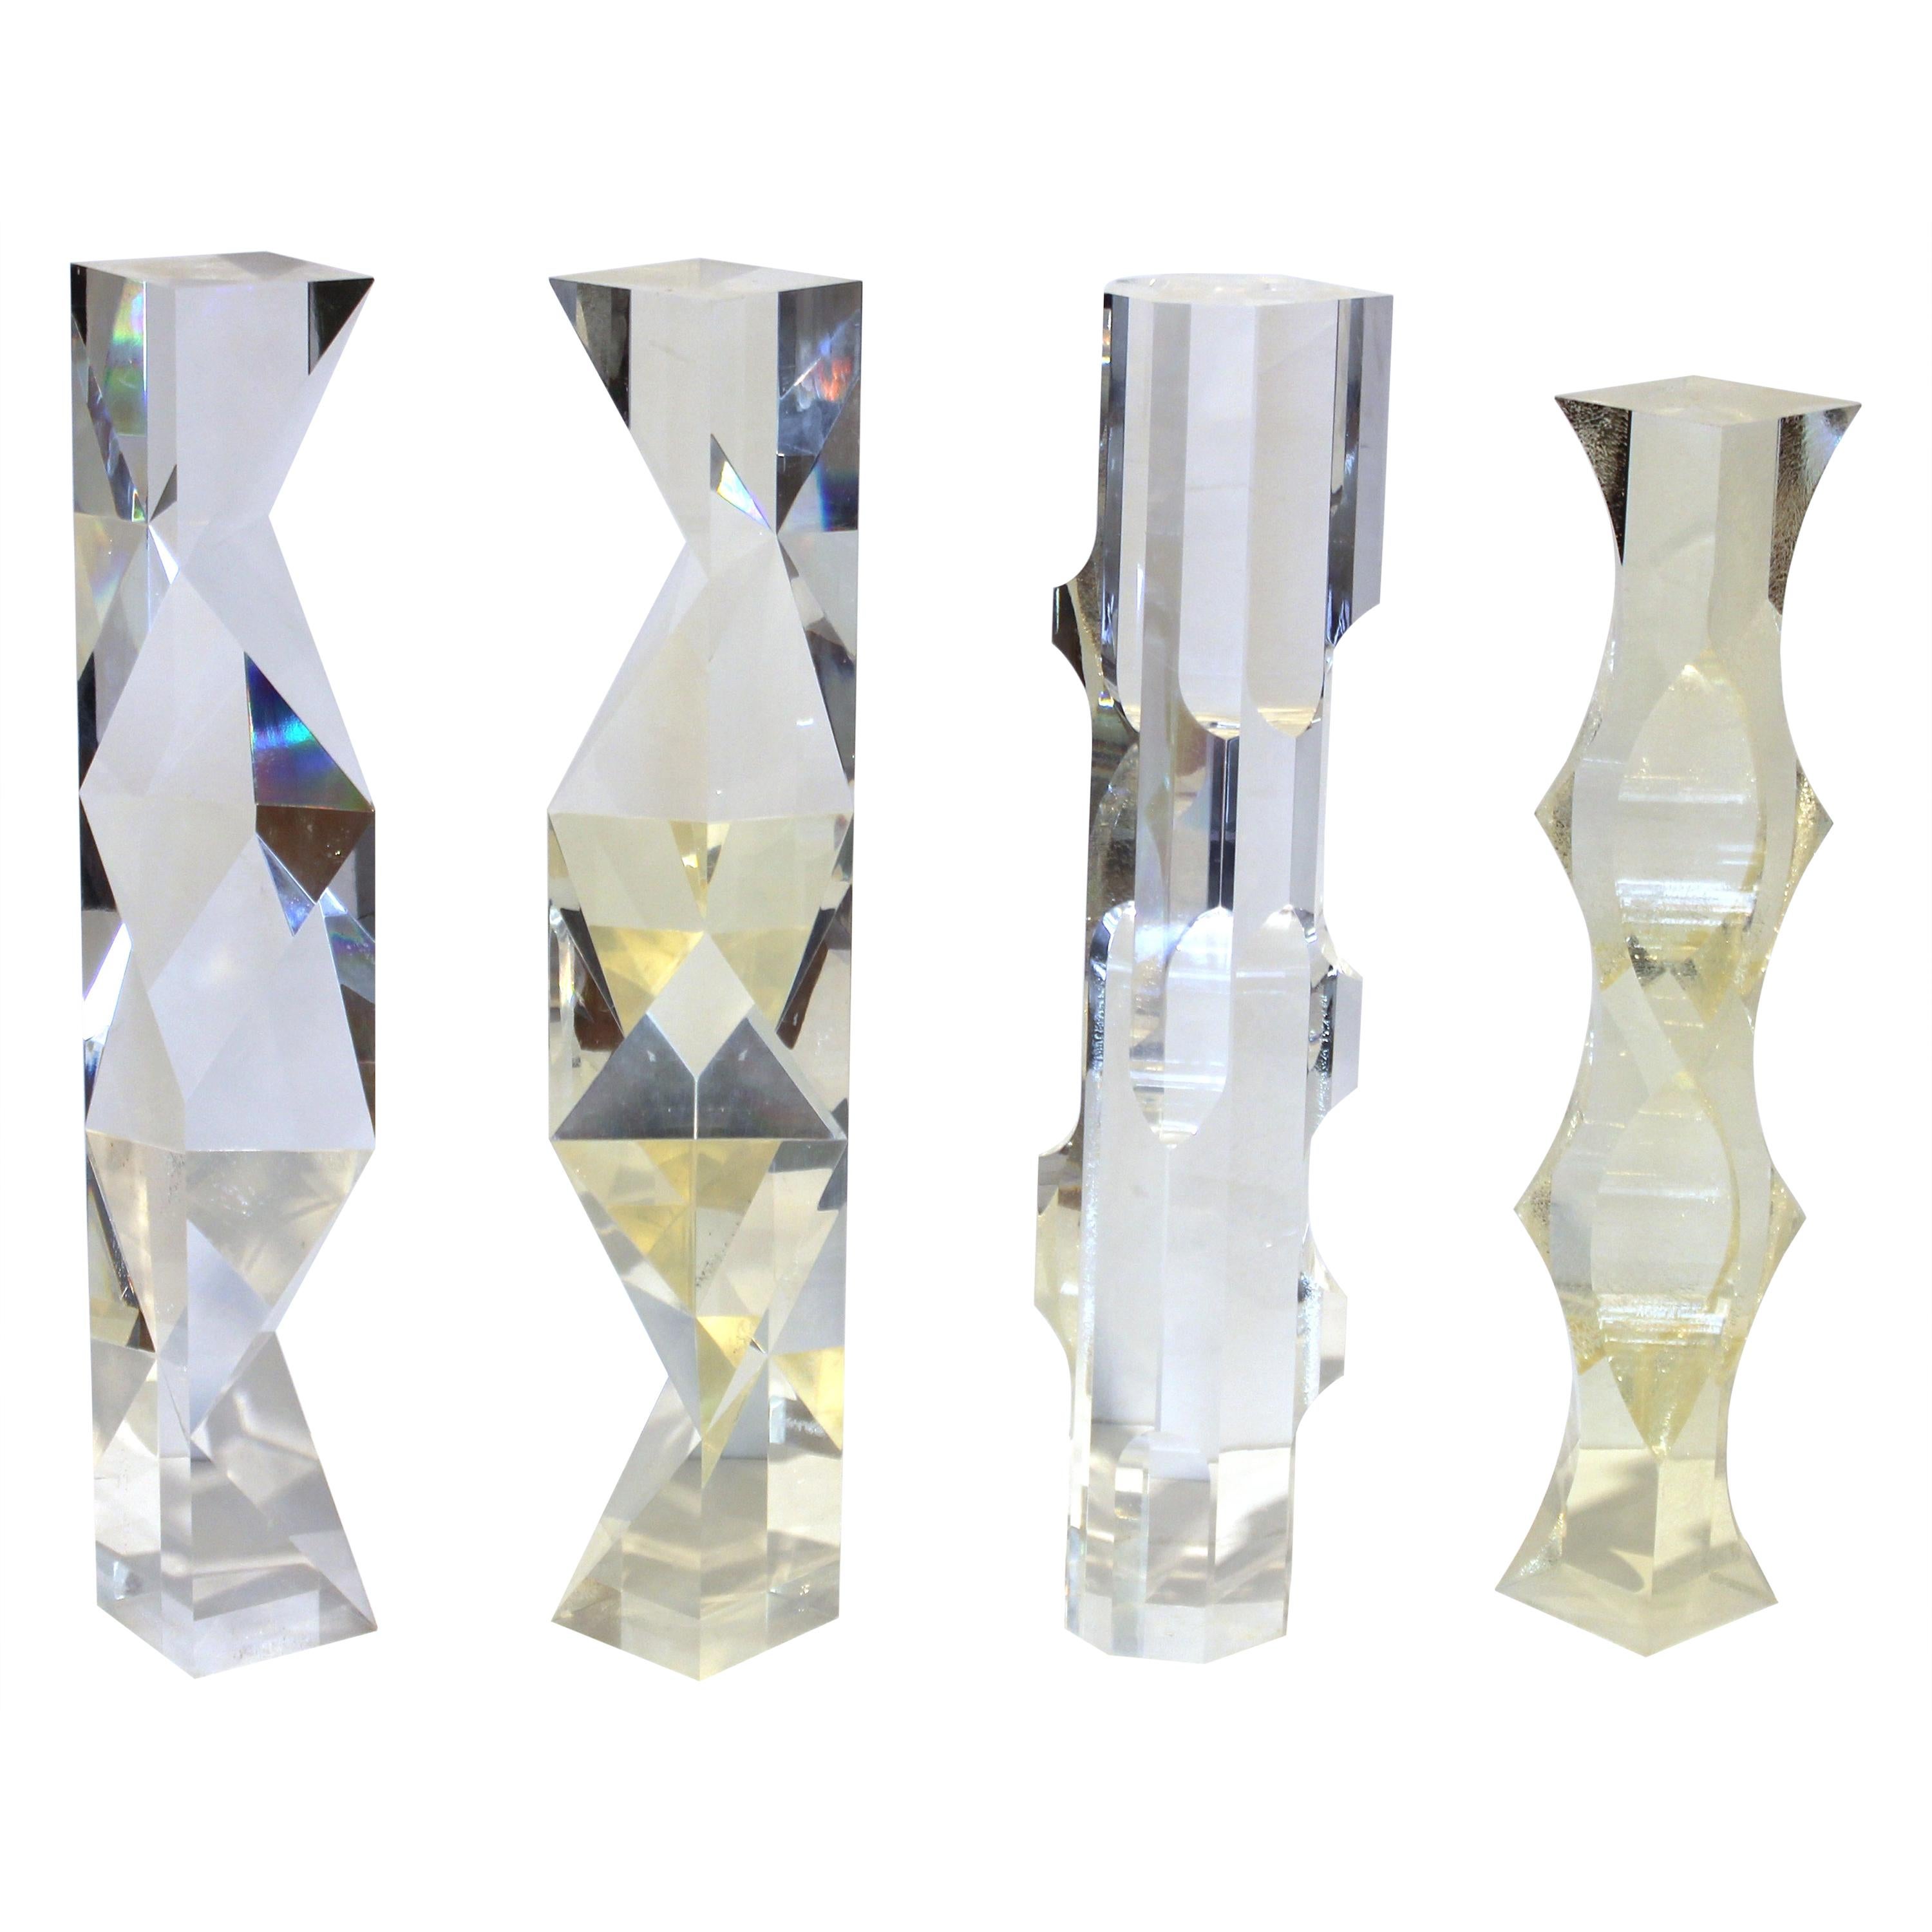 Alessio Tasca Italian Modern Abstract Lucite 'Fusina' Prism Sculptures For Sale